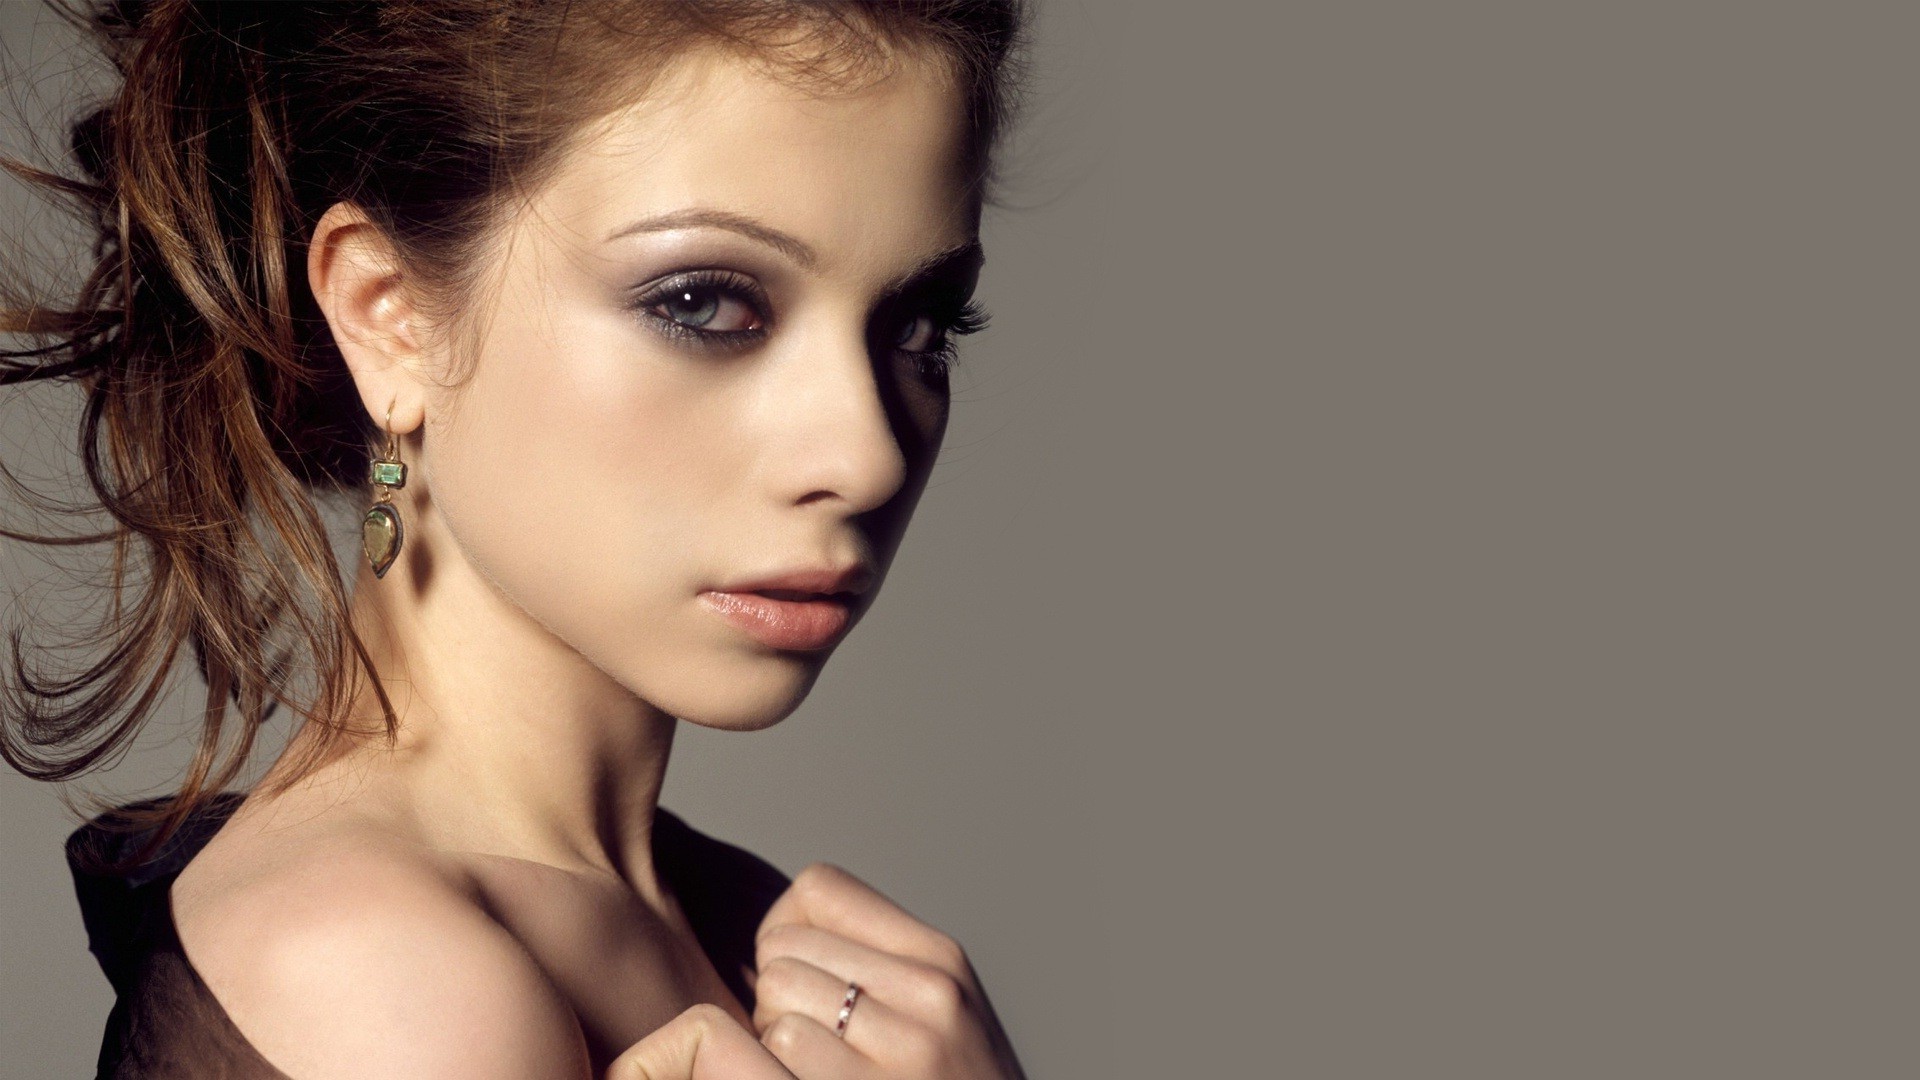 Images of Michelle Trachtenberg | 1920x1080